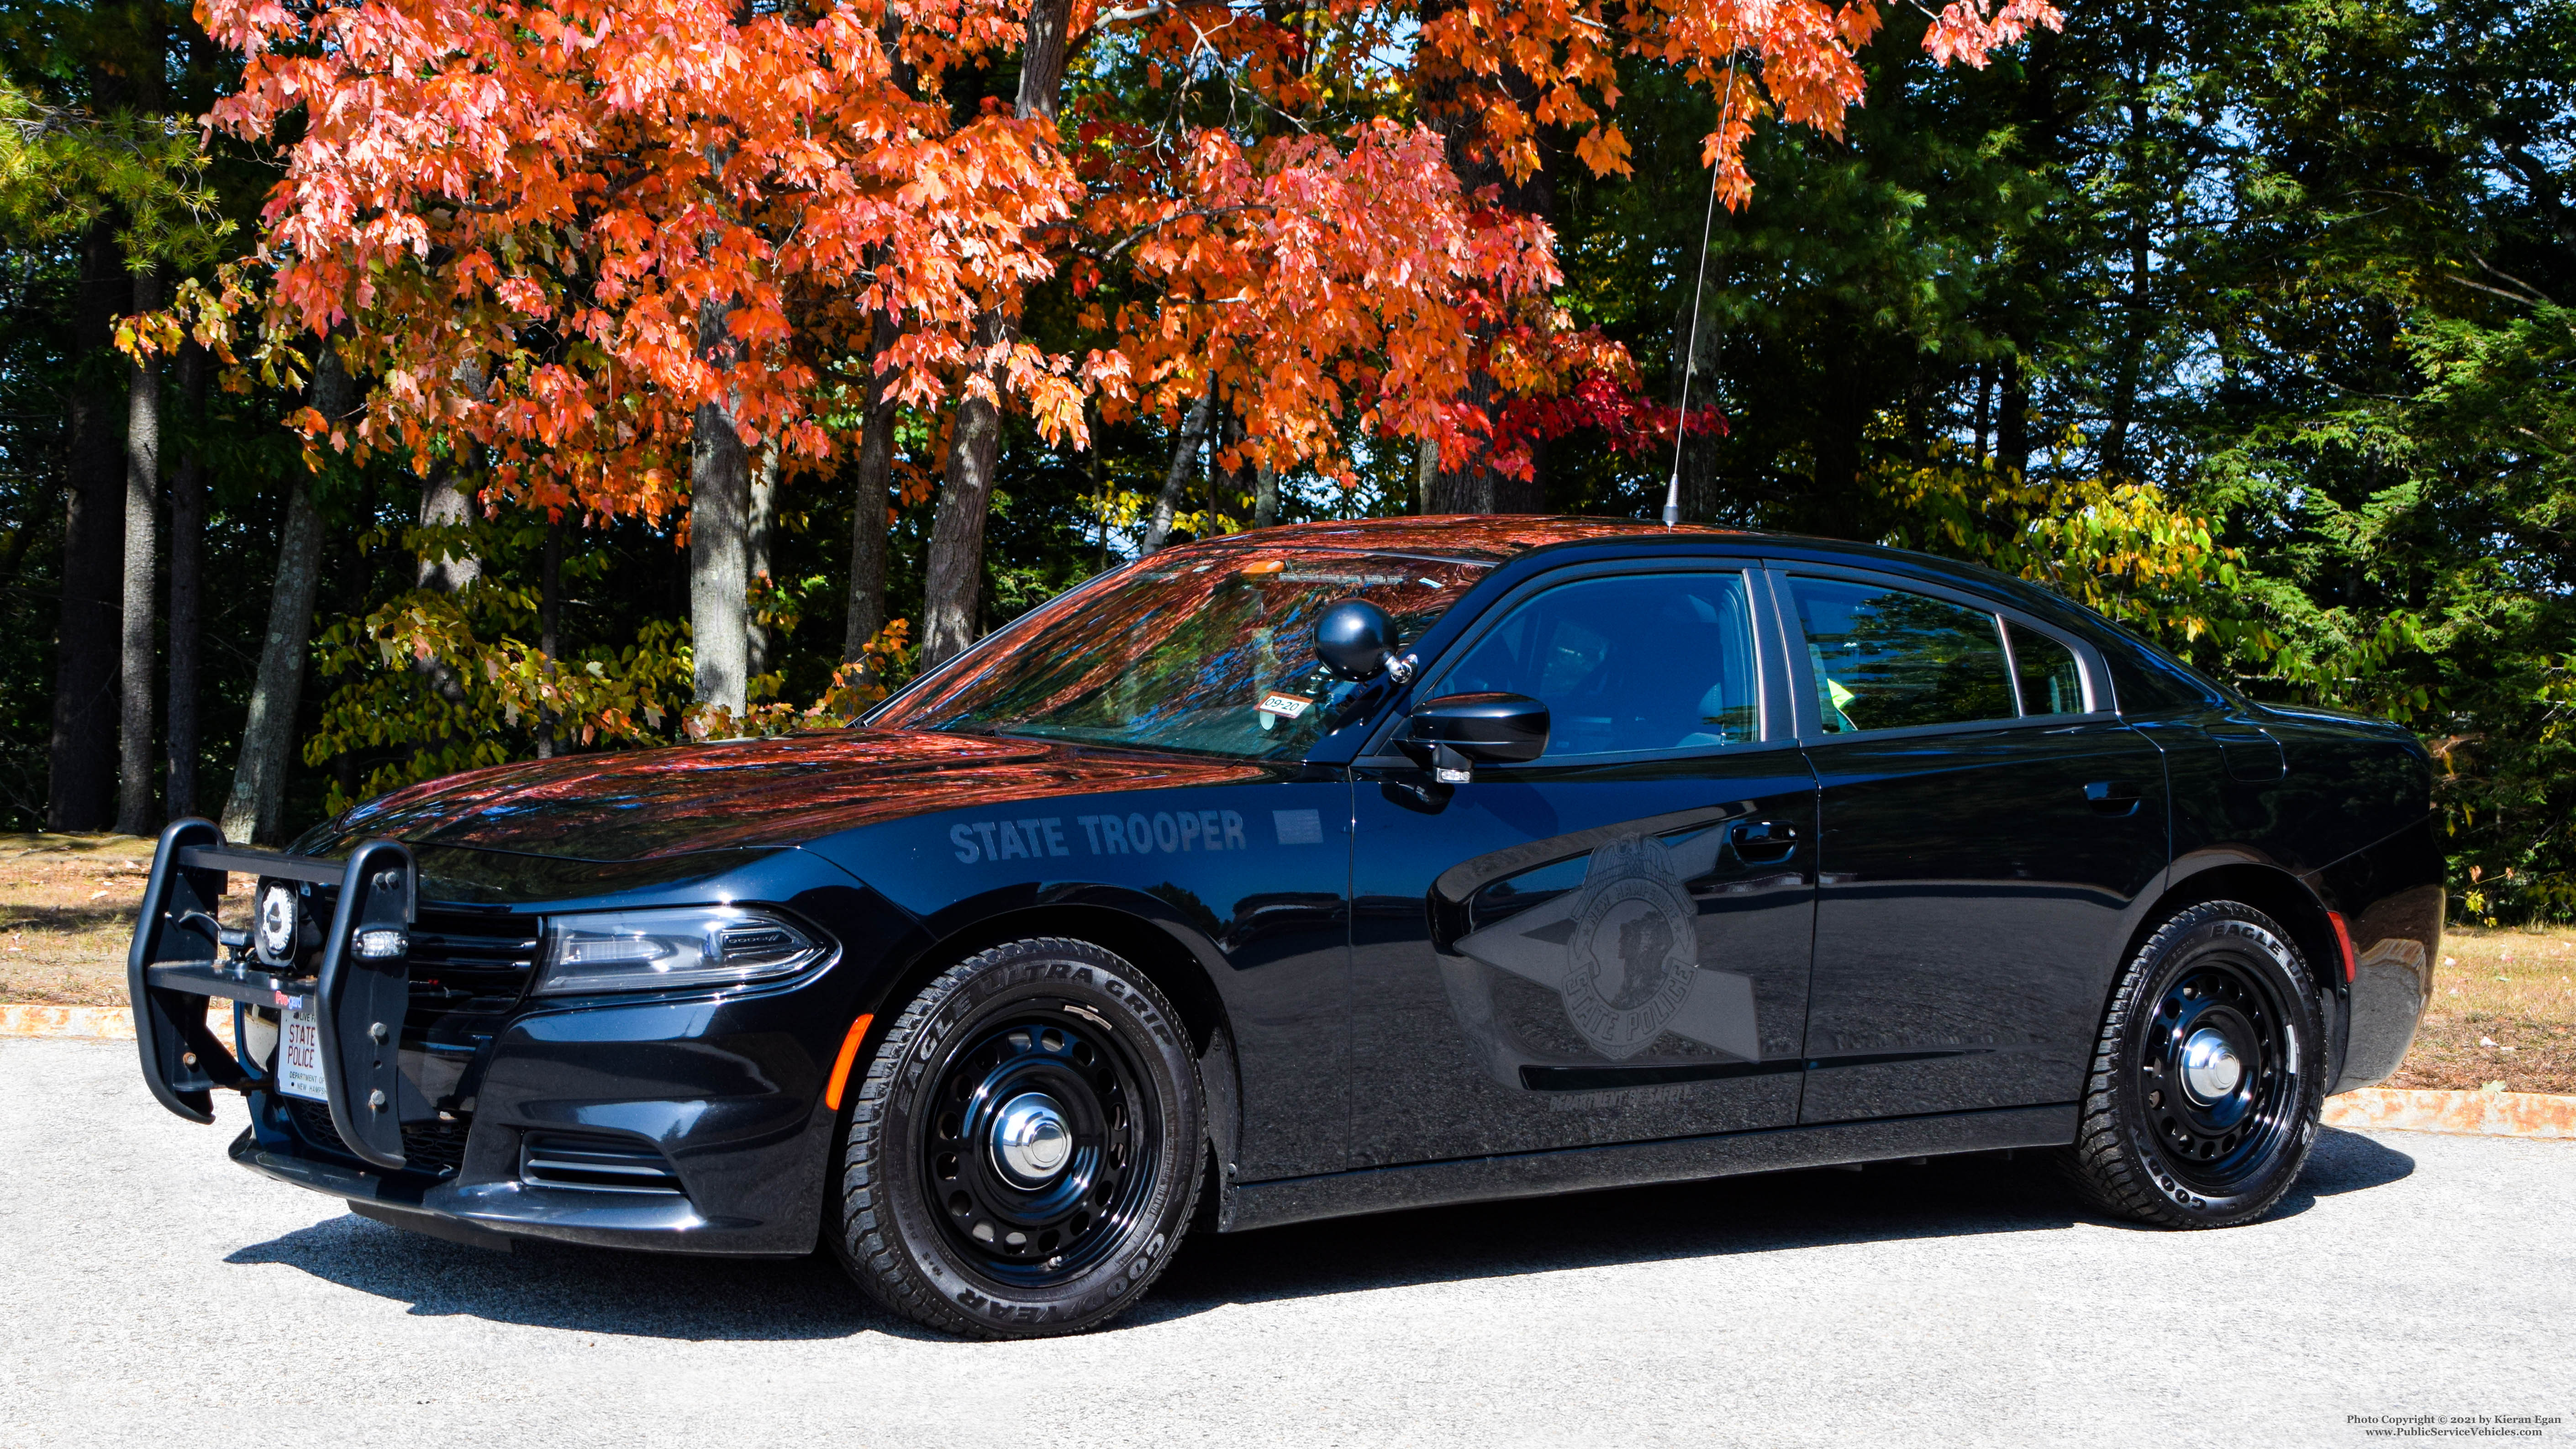 A photo  of New Hampshire State Police
            Cruiser 27, a 2015-2016 Dodge Charger             taken by Kieran Egan